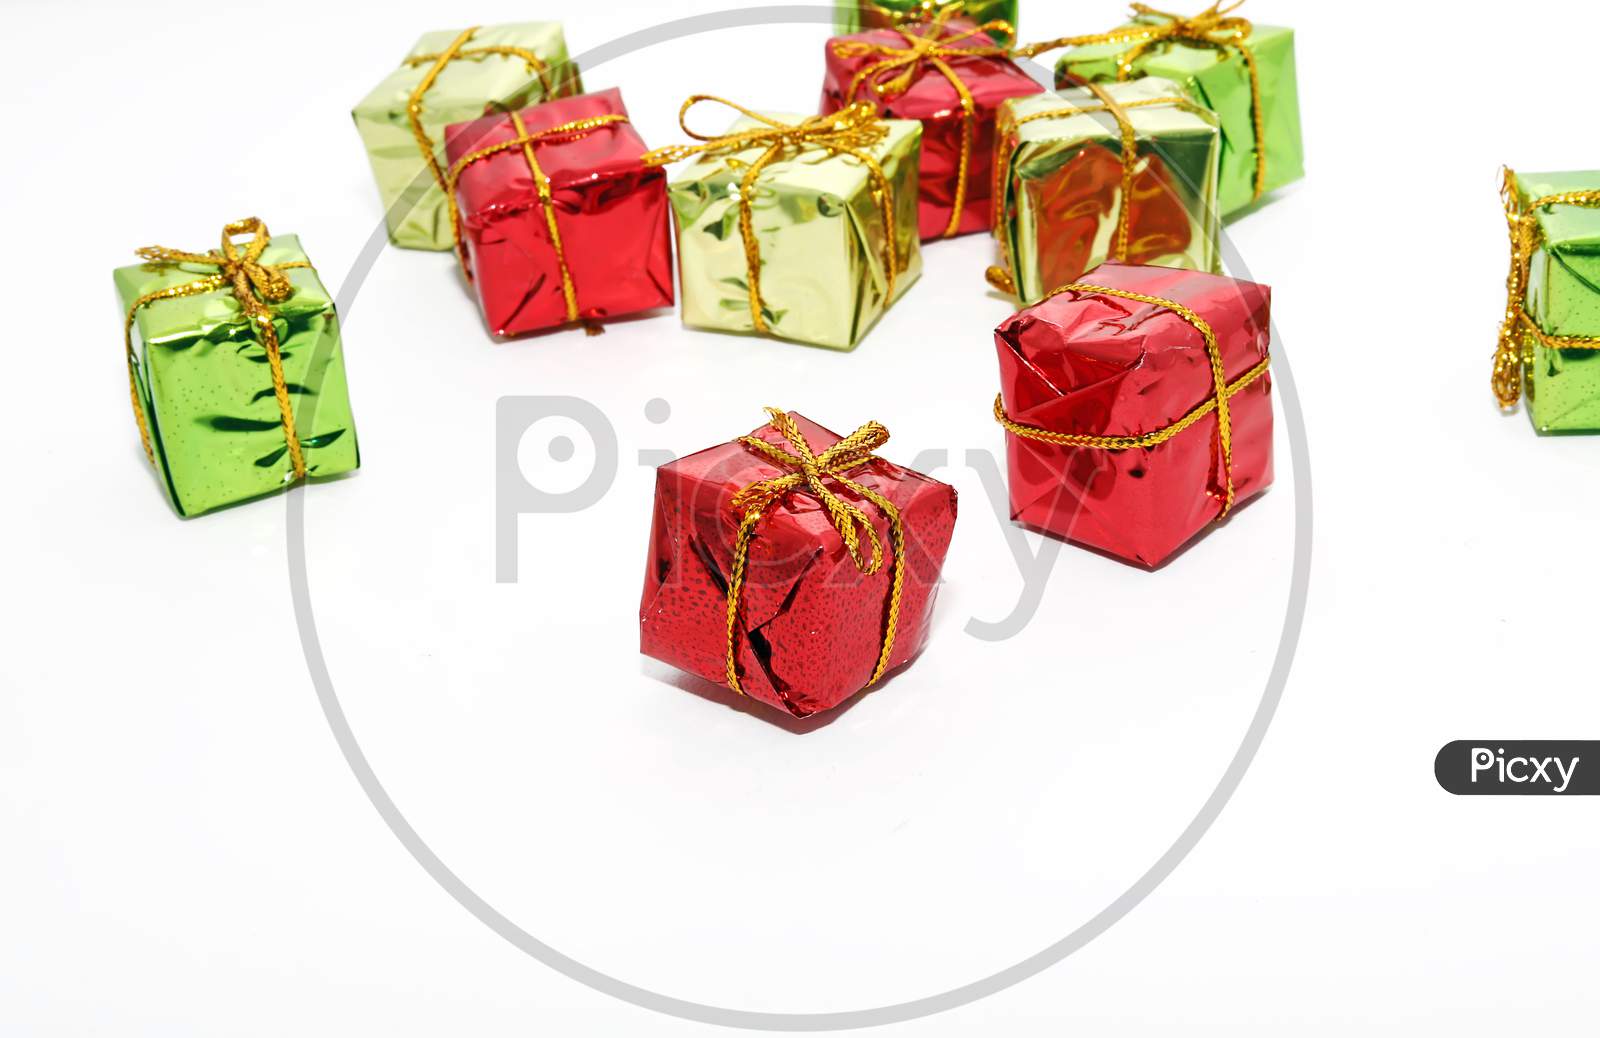 Top View Of Arranged Wrapped Christmas Gift Boxes With Ribbons On White Background